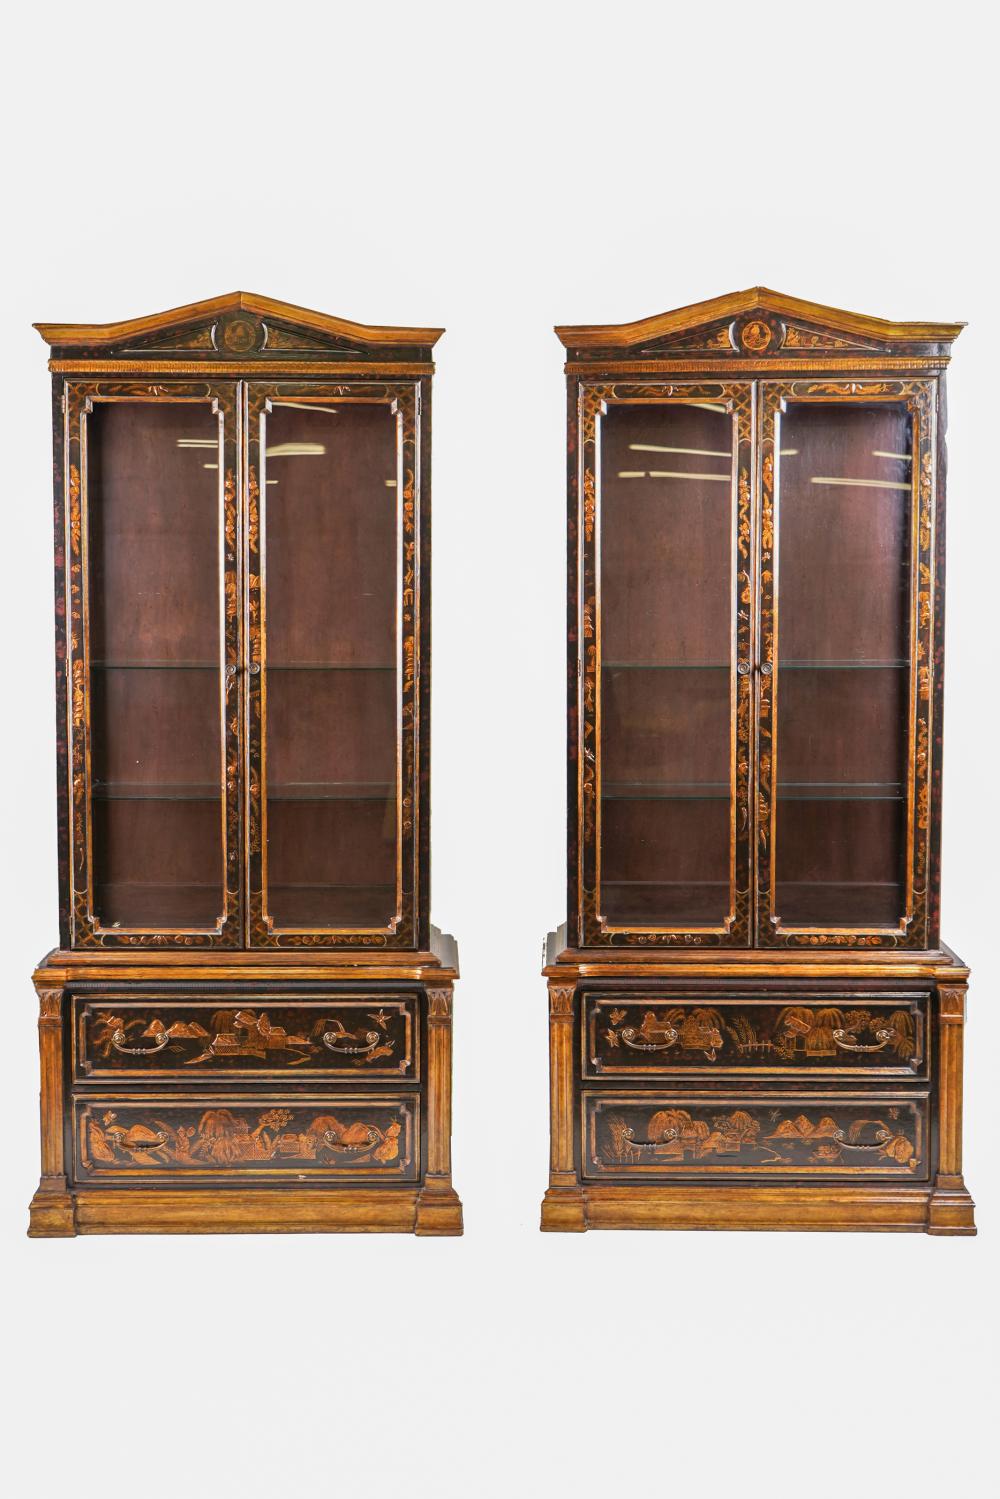 PAIR OF CHINOISERIE DISPLAY CASEScontemporary,